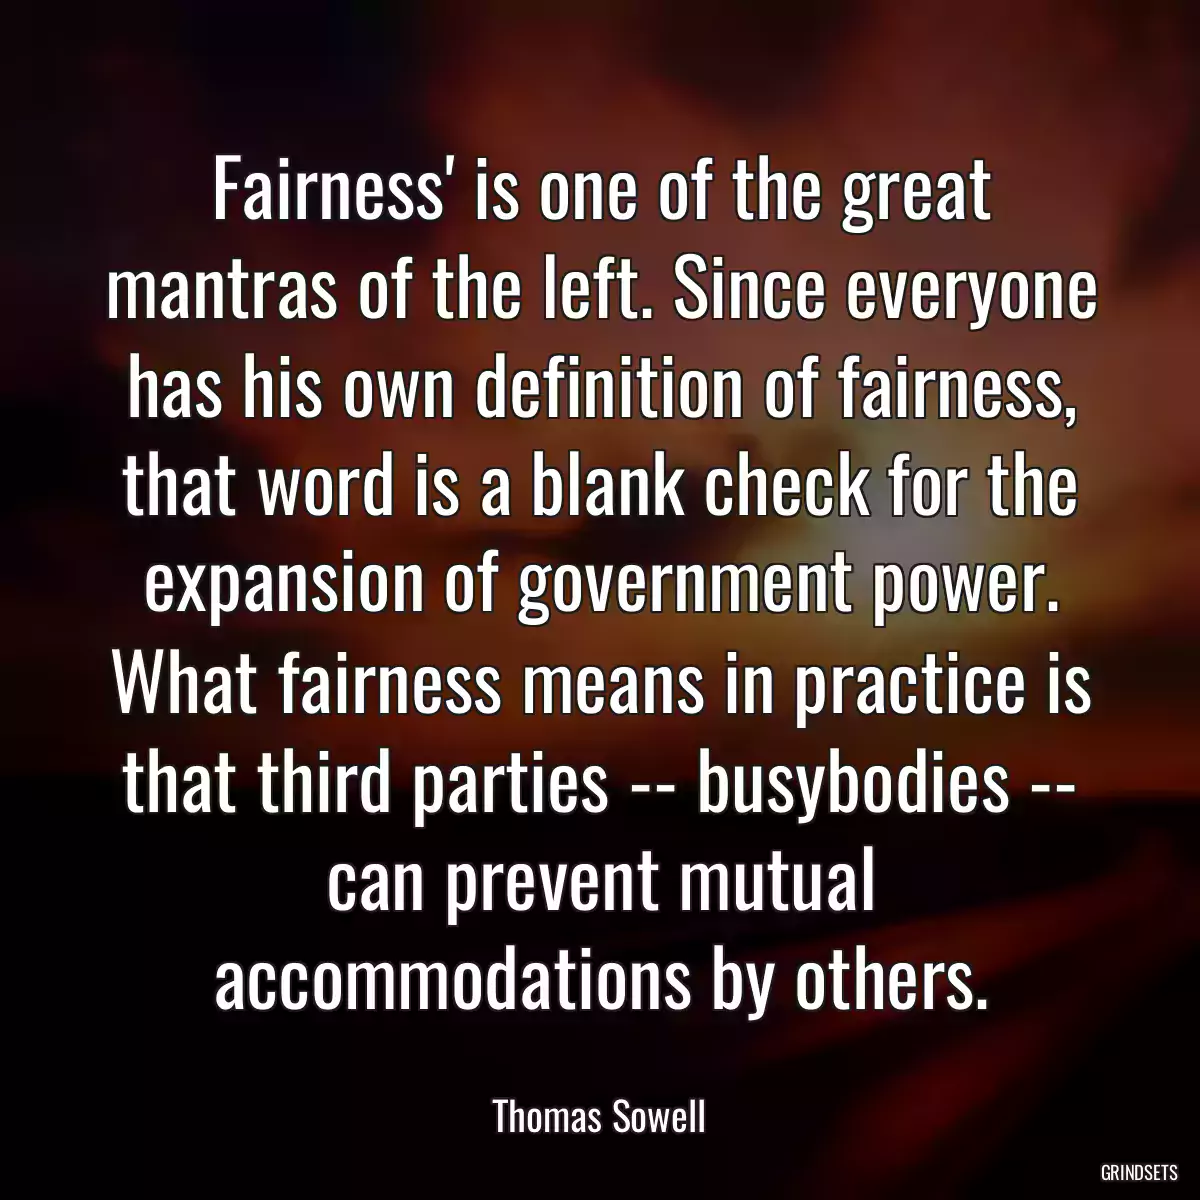 Fairness\' is one of the great mantras of the left. Since everyone has his own definition of fairness, that word is a blank check for the expansion of government power. What fairness means in practice is that third parties -- busybodies -- can prevent mutual accommodations by others.